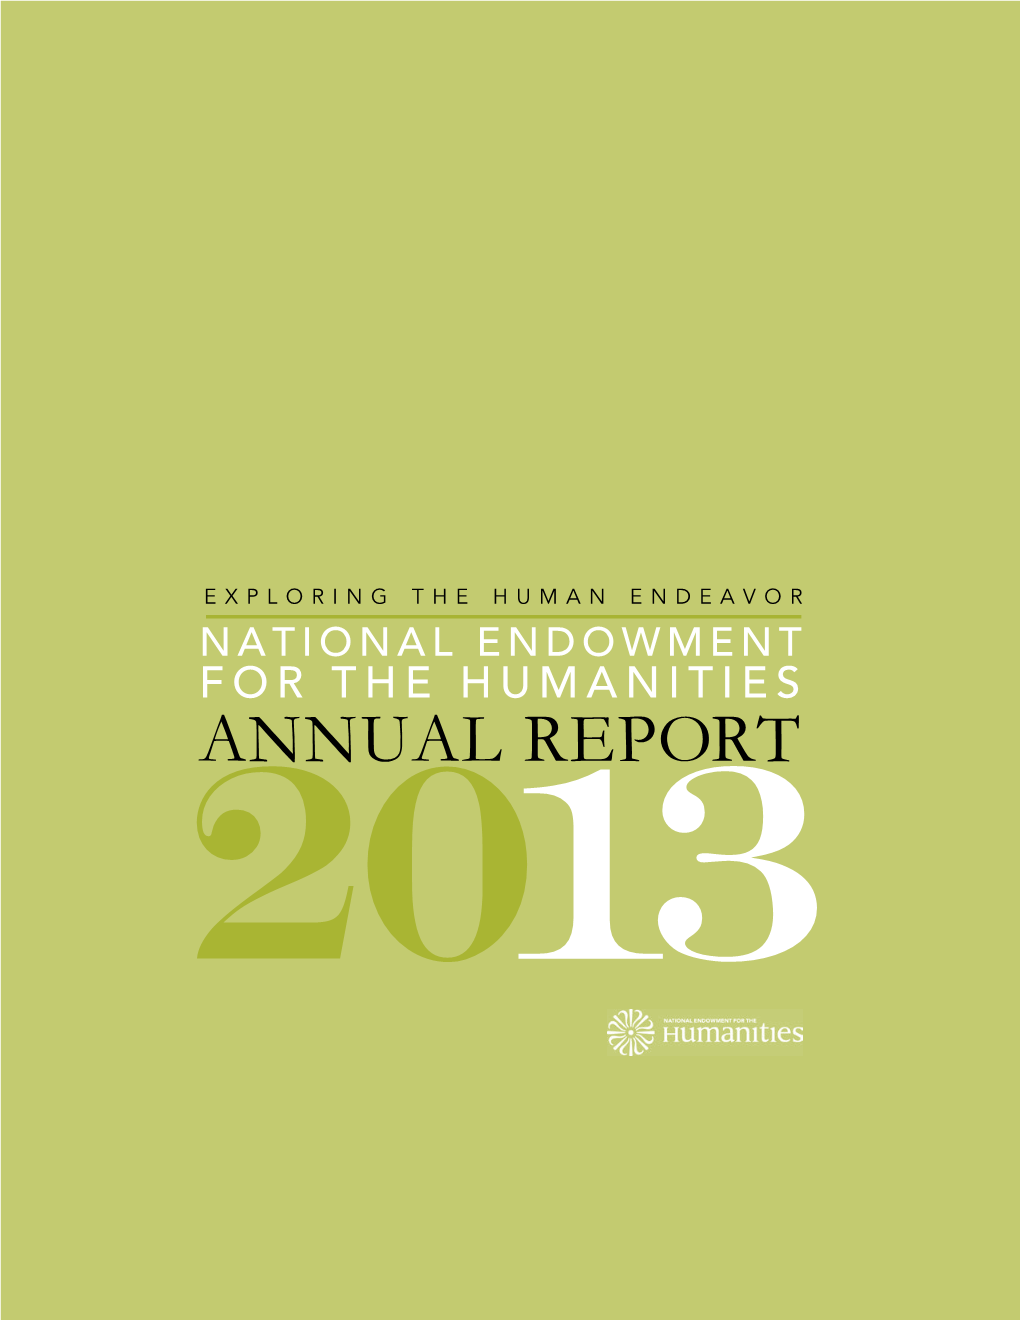 Annual Report of the National Endowment for the Humanities